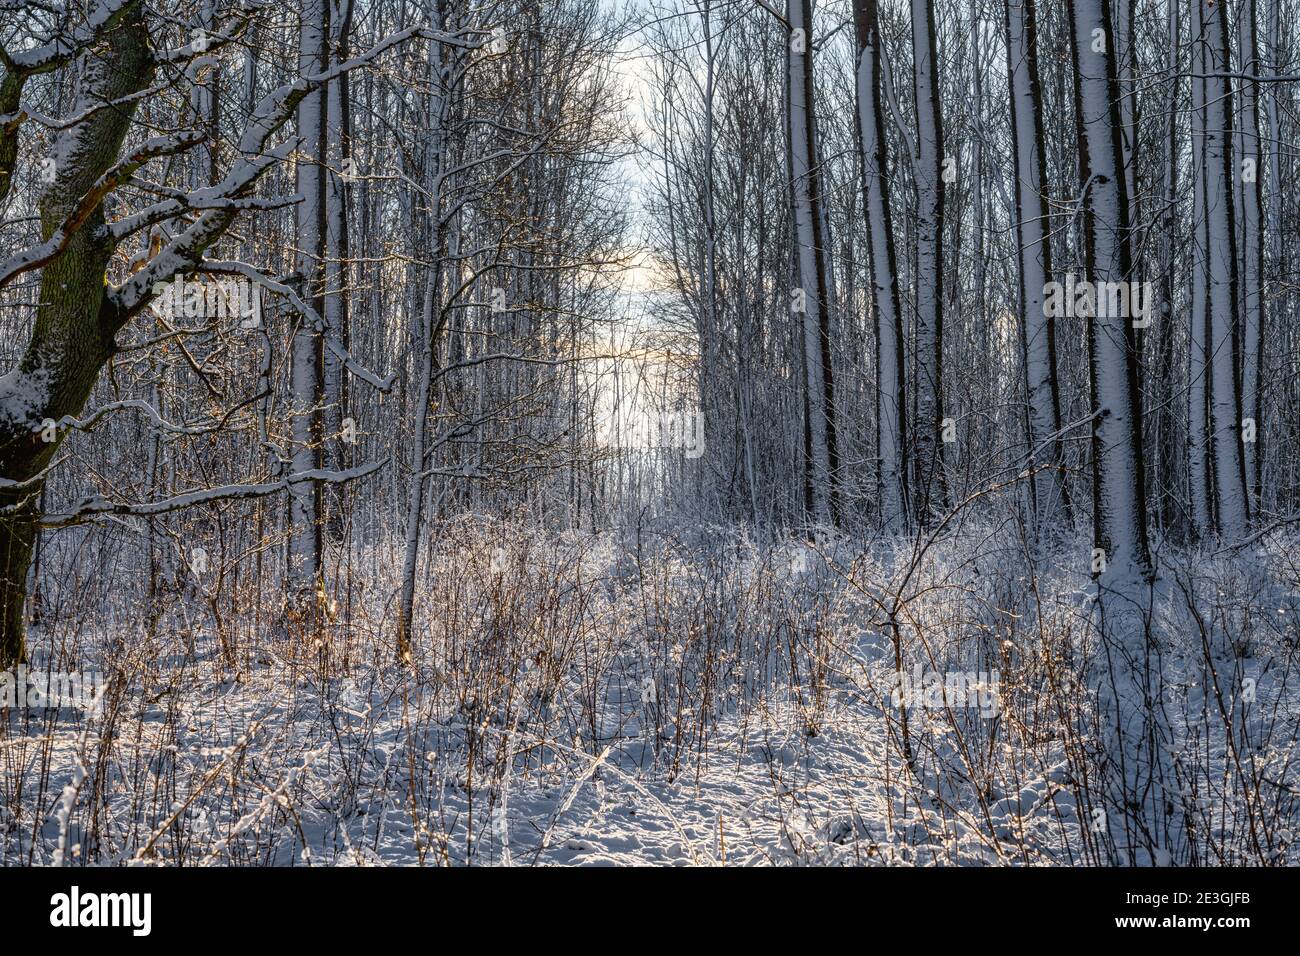 A backlit photo of a forest glade covered in snow a crispy cold winter day. Picture from Eslov, southern Sweden Stock Photo